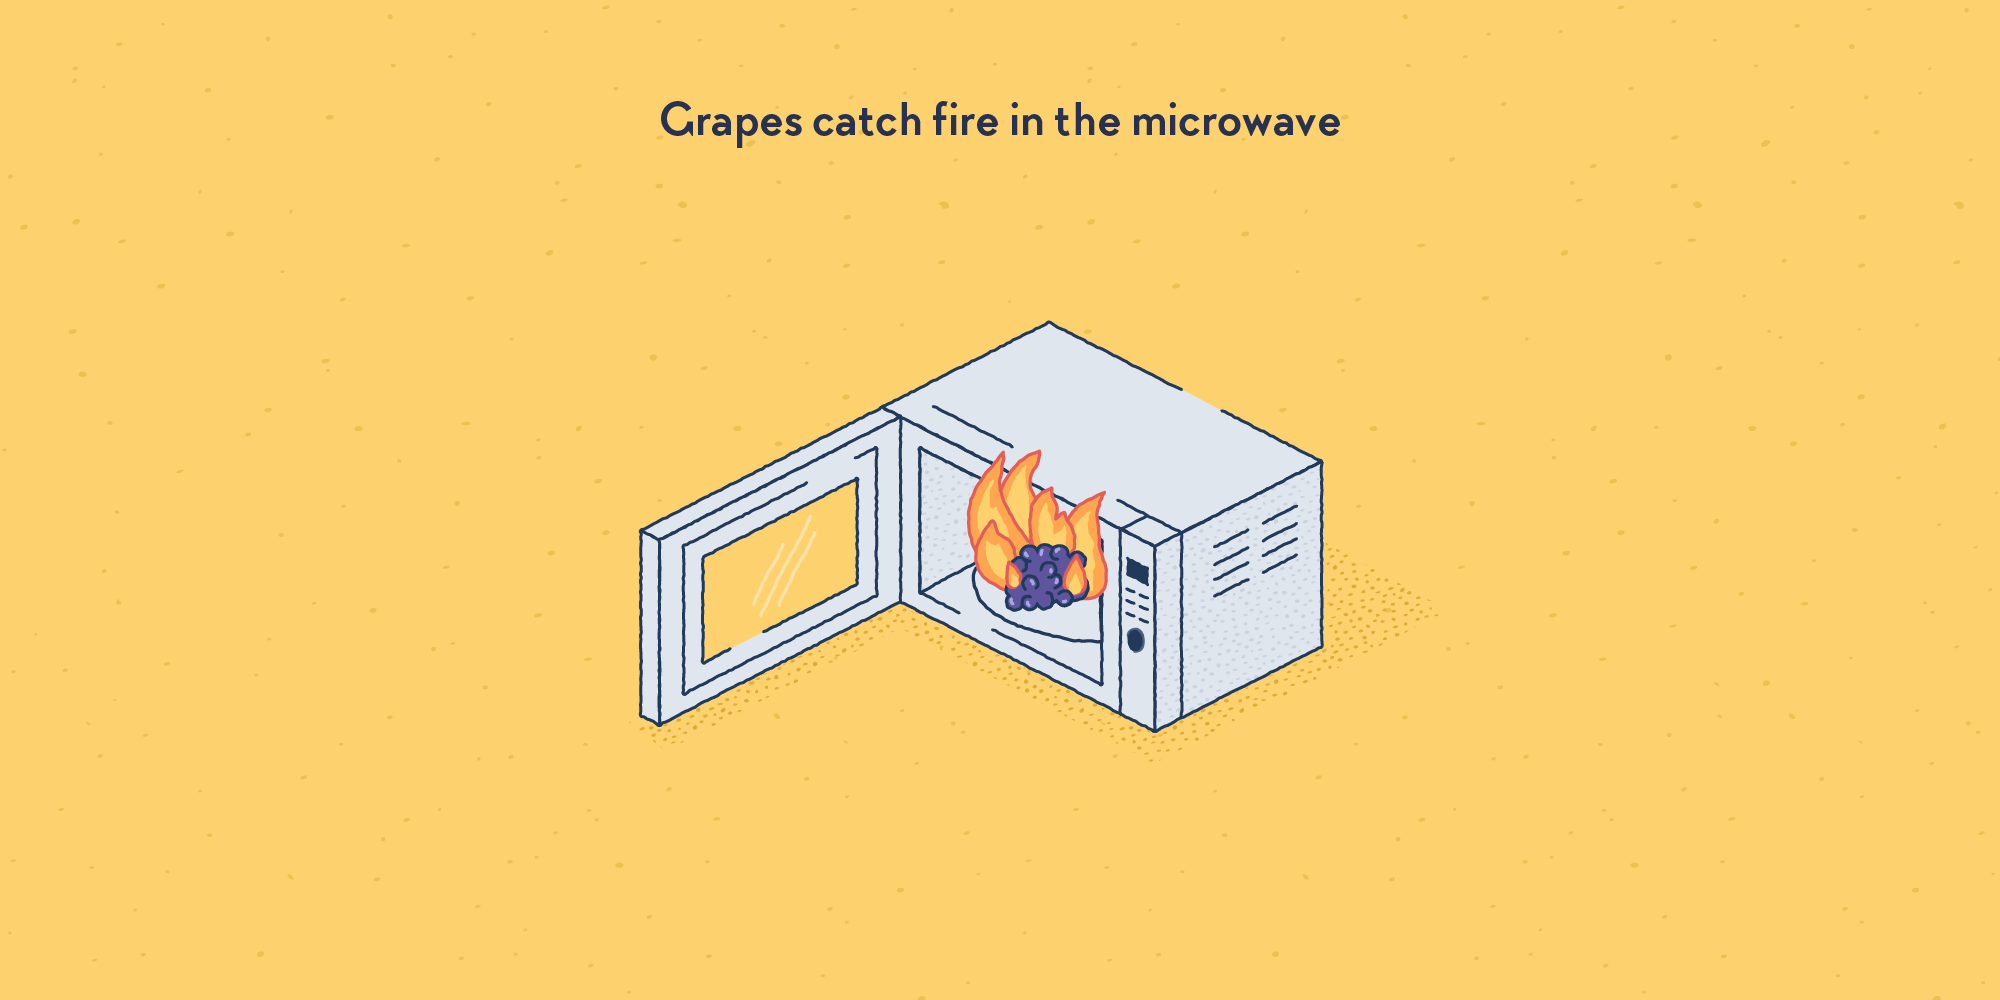 A bunch of grapes in a microwave, on fire.